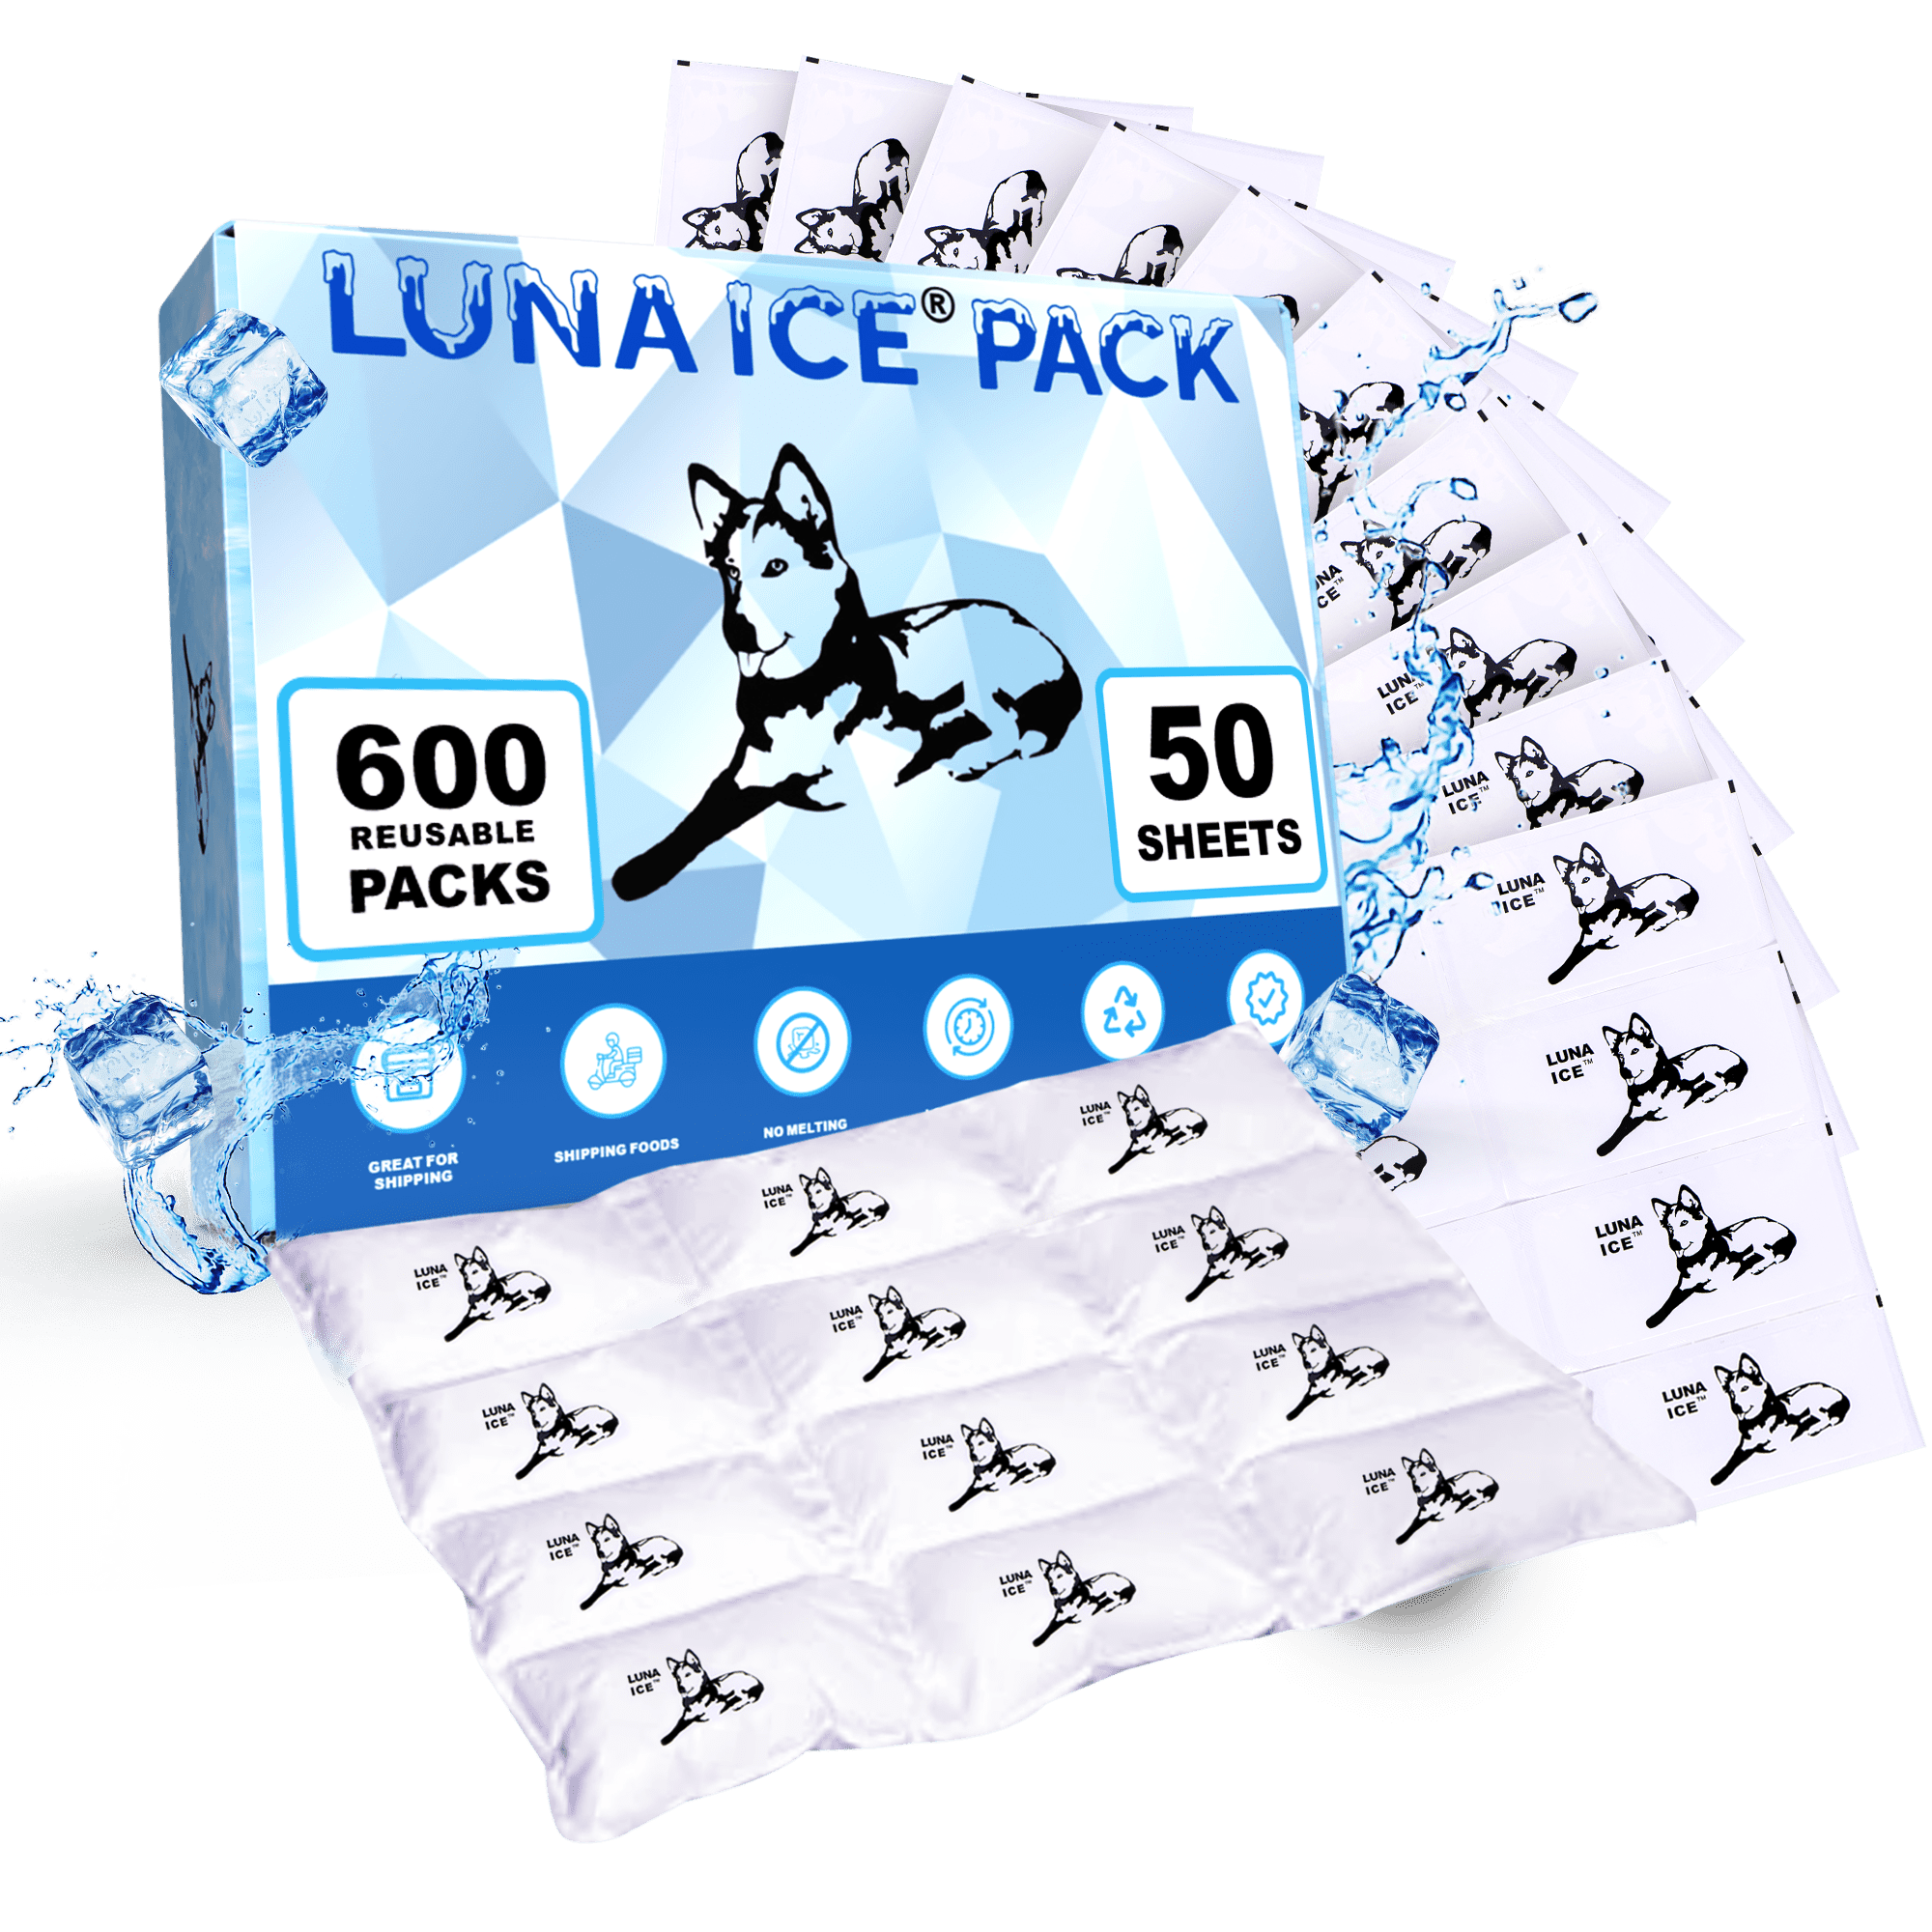 Luna Ice Gel Ice Packs - Dry Ice for Shipping Frozen Food, Lunch Bags &  Injuries - Reusable & Long-Lasting Cold Packs for Coolers, Ice Bag for  Shipping Frozen Food - Dry